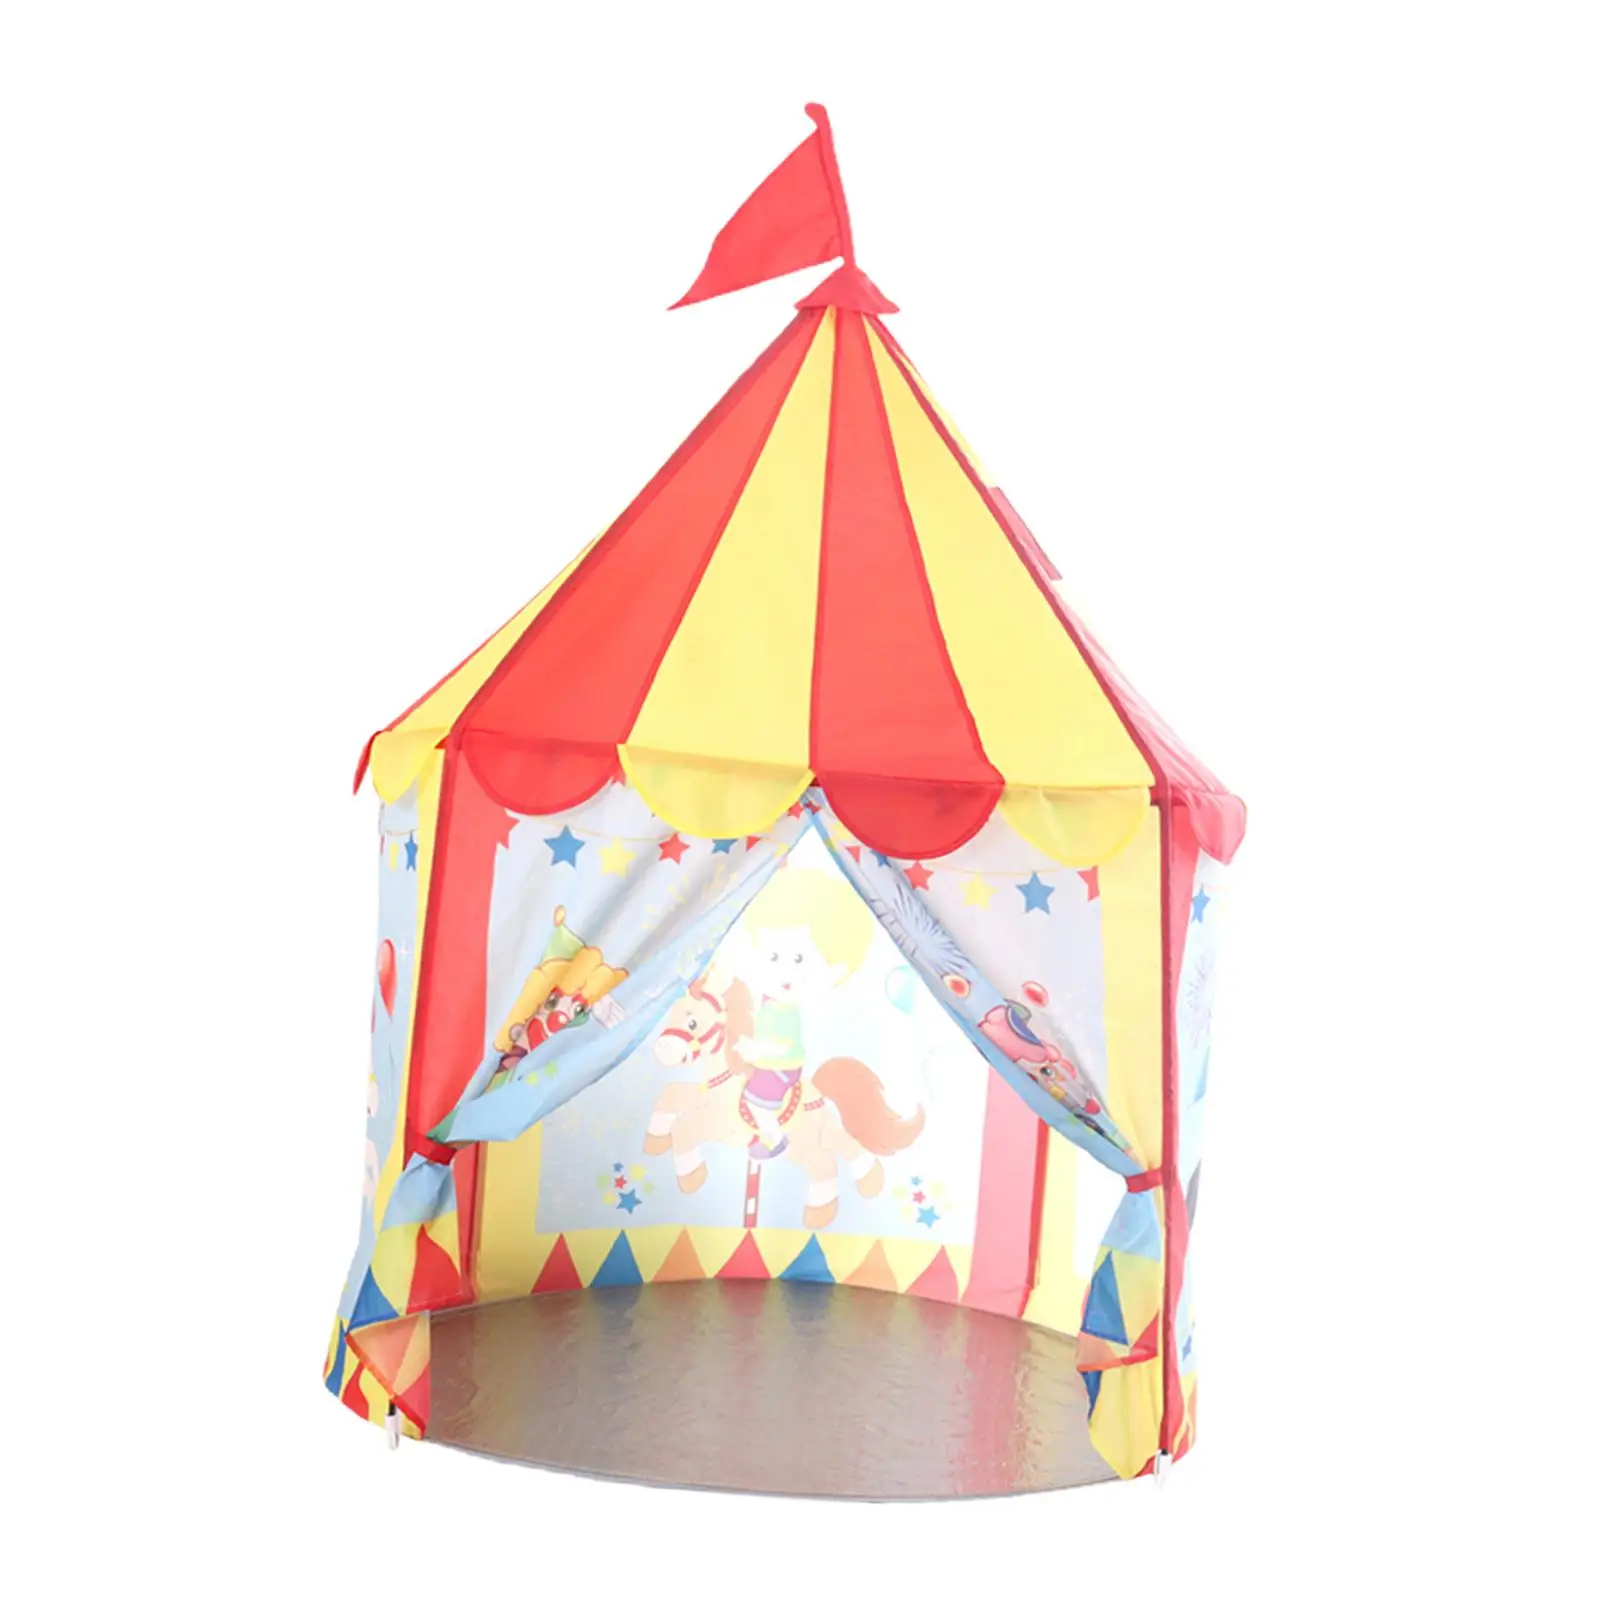 Kids Playhouse Birthday Gift Easy to Assemble Portable Children Castle Playhous Play Tent for Home Garden Camping Yard Baby